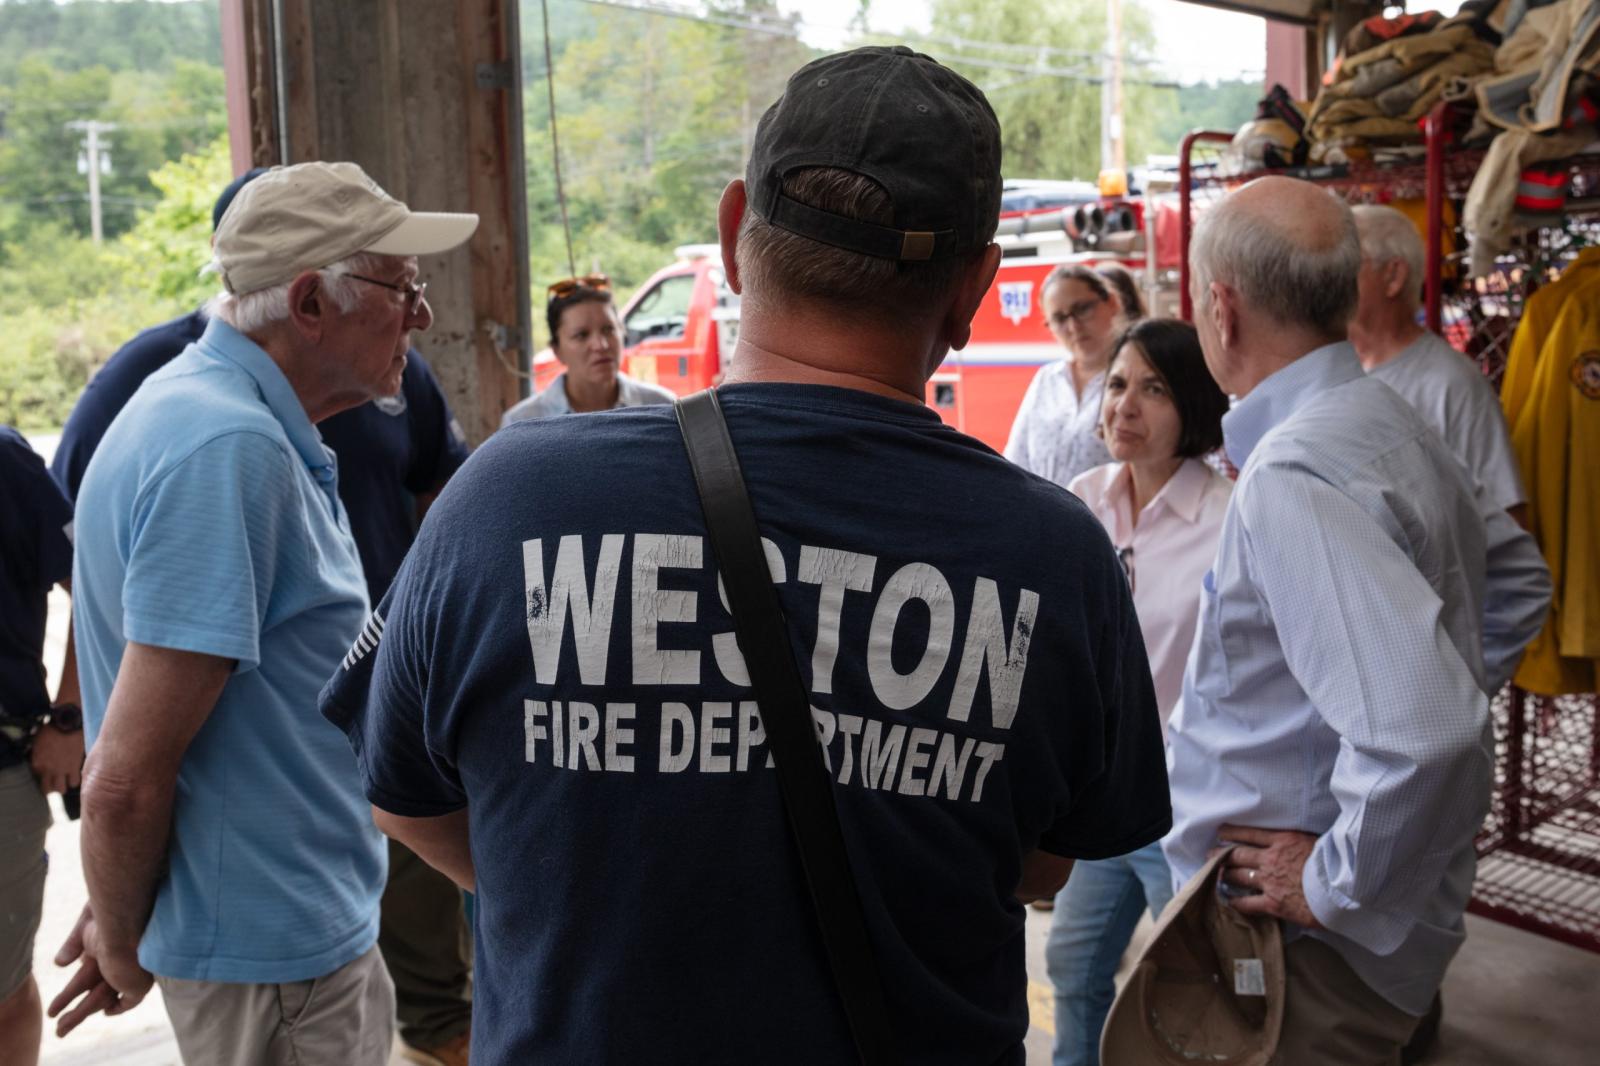 PHOTOS: Congressional delegation tours flood damage in southern Vermont - VTDigger